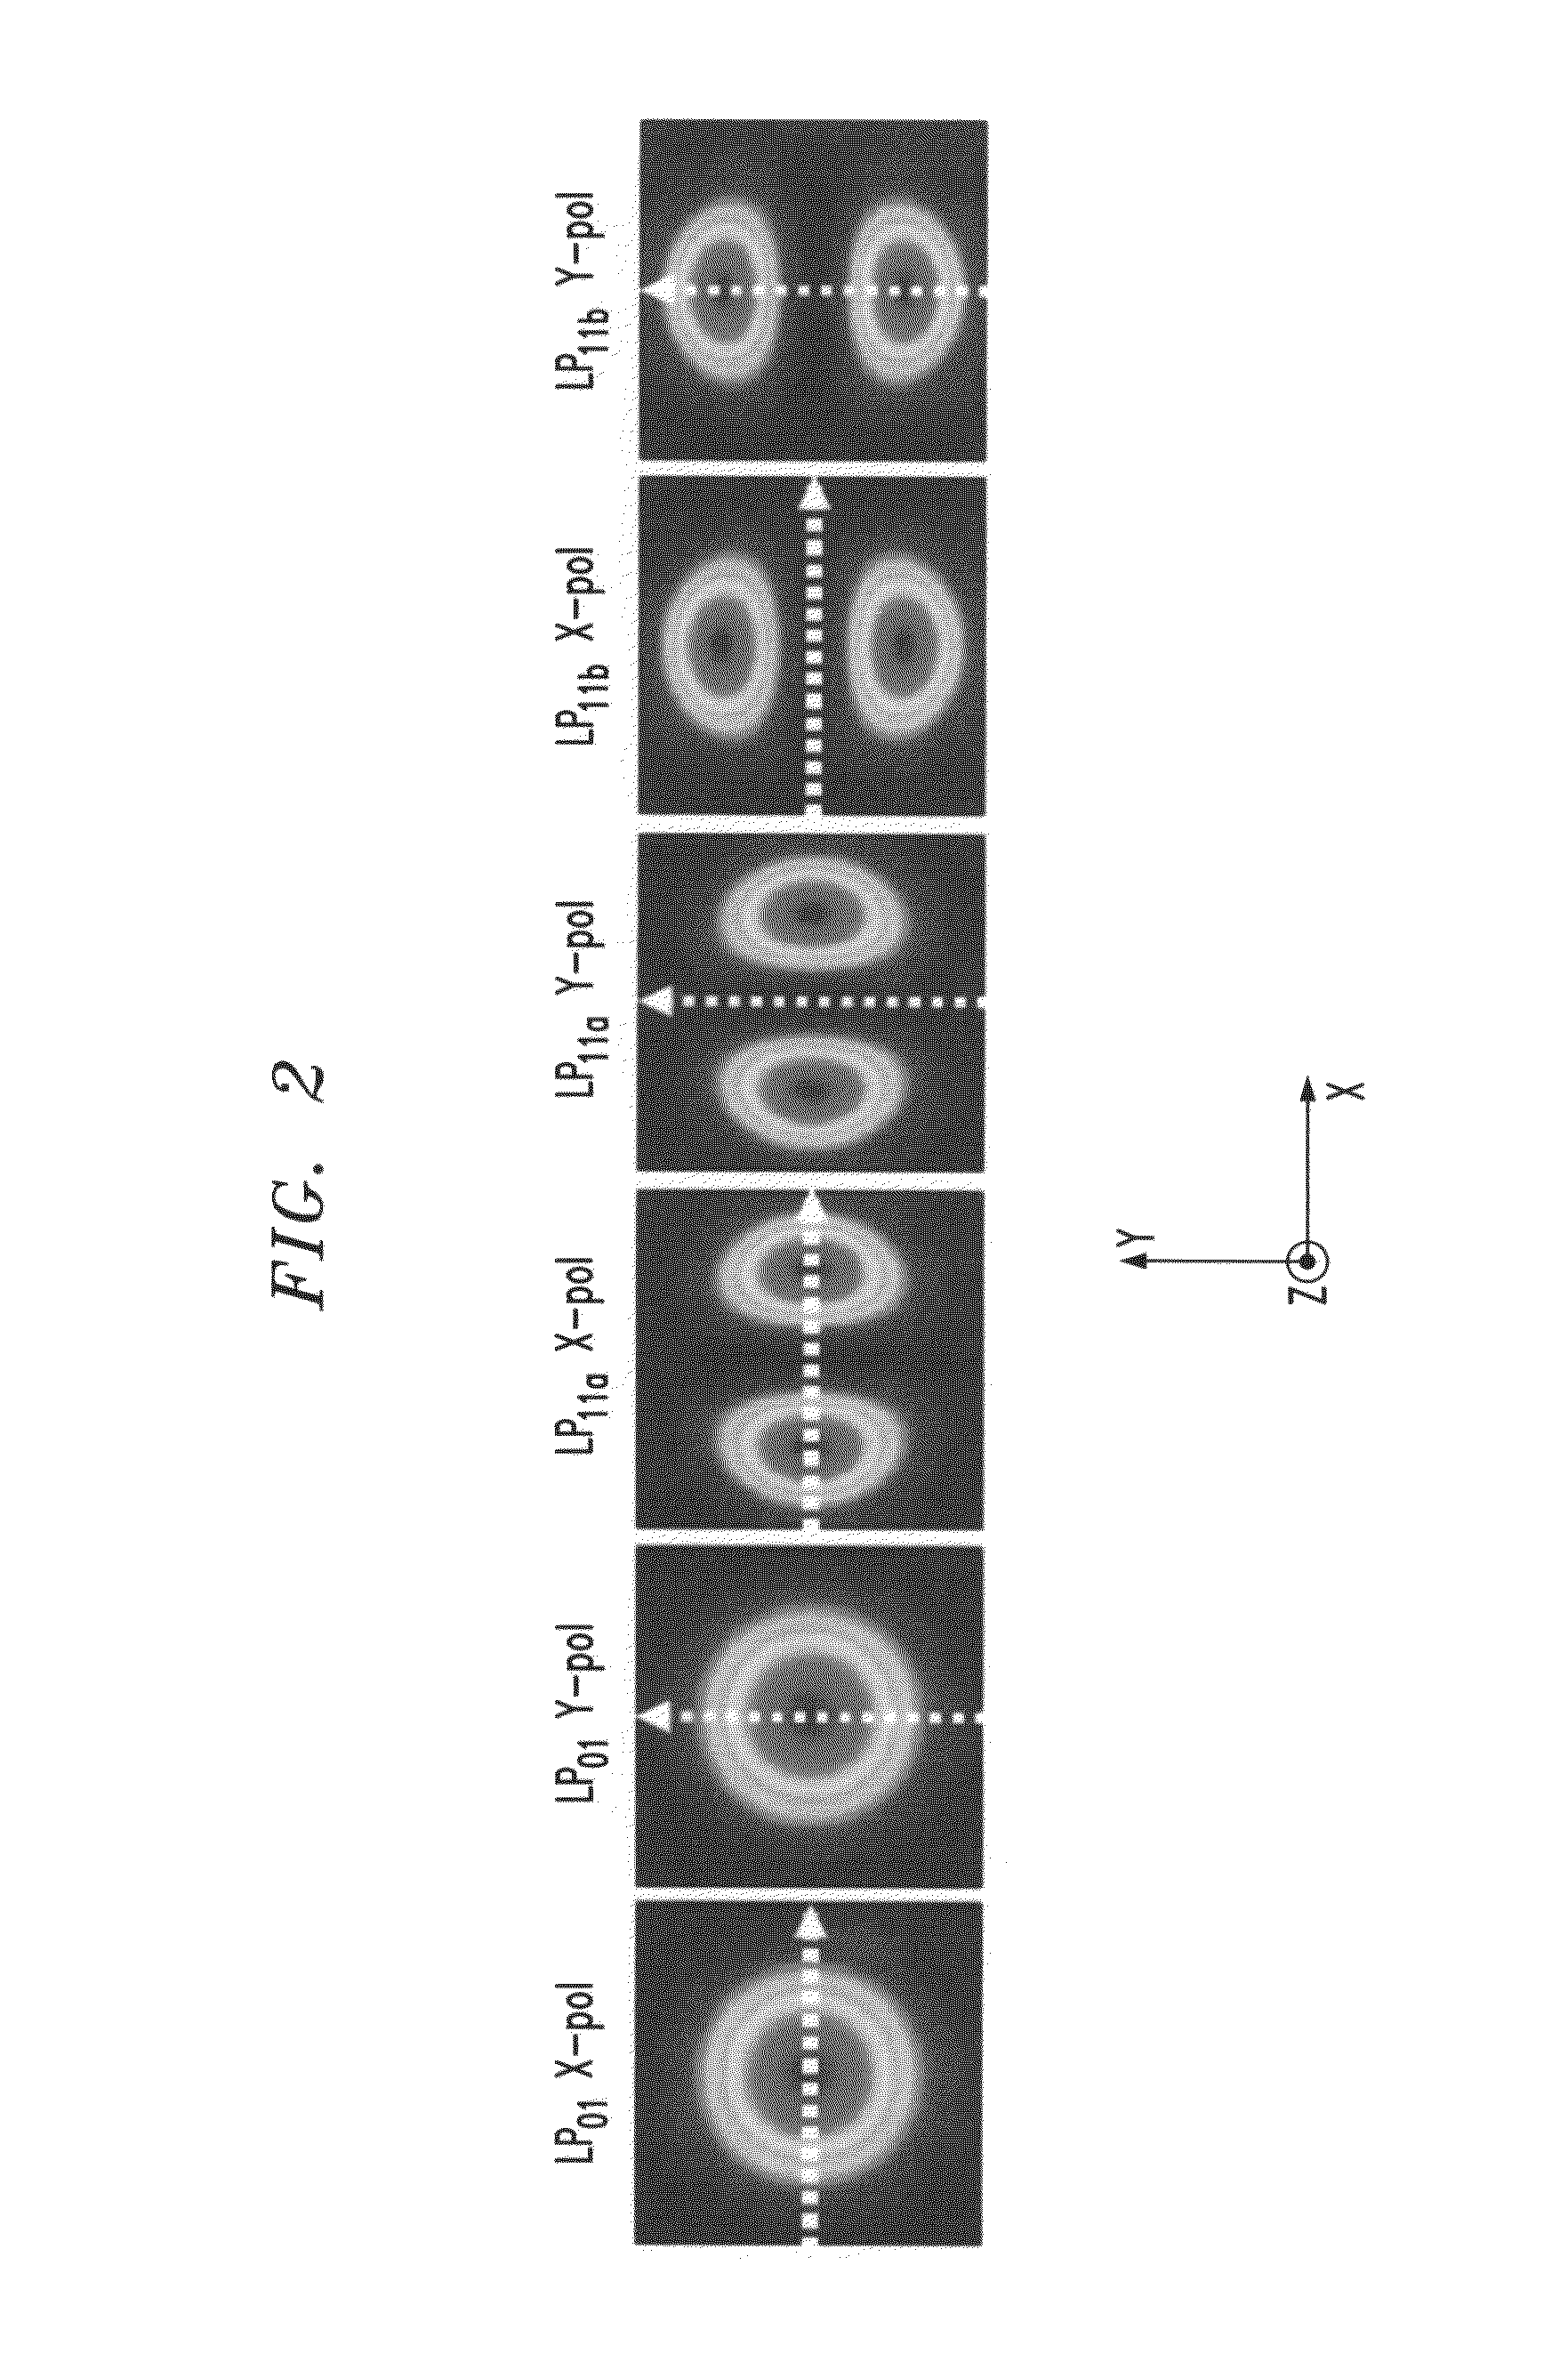 Intra-link spatial-mode mixing in an under-addressed optical MIMO system